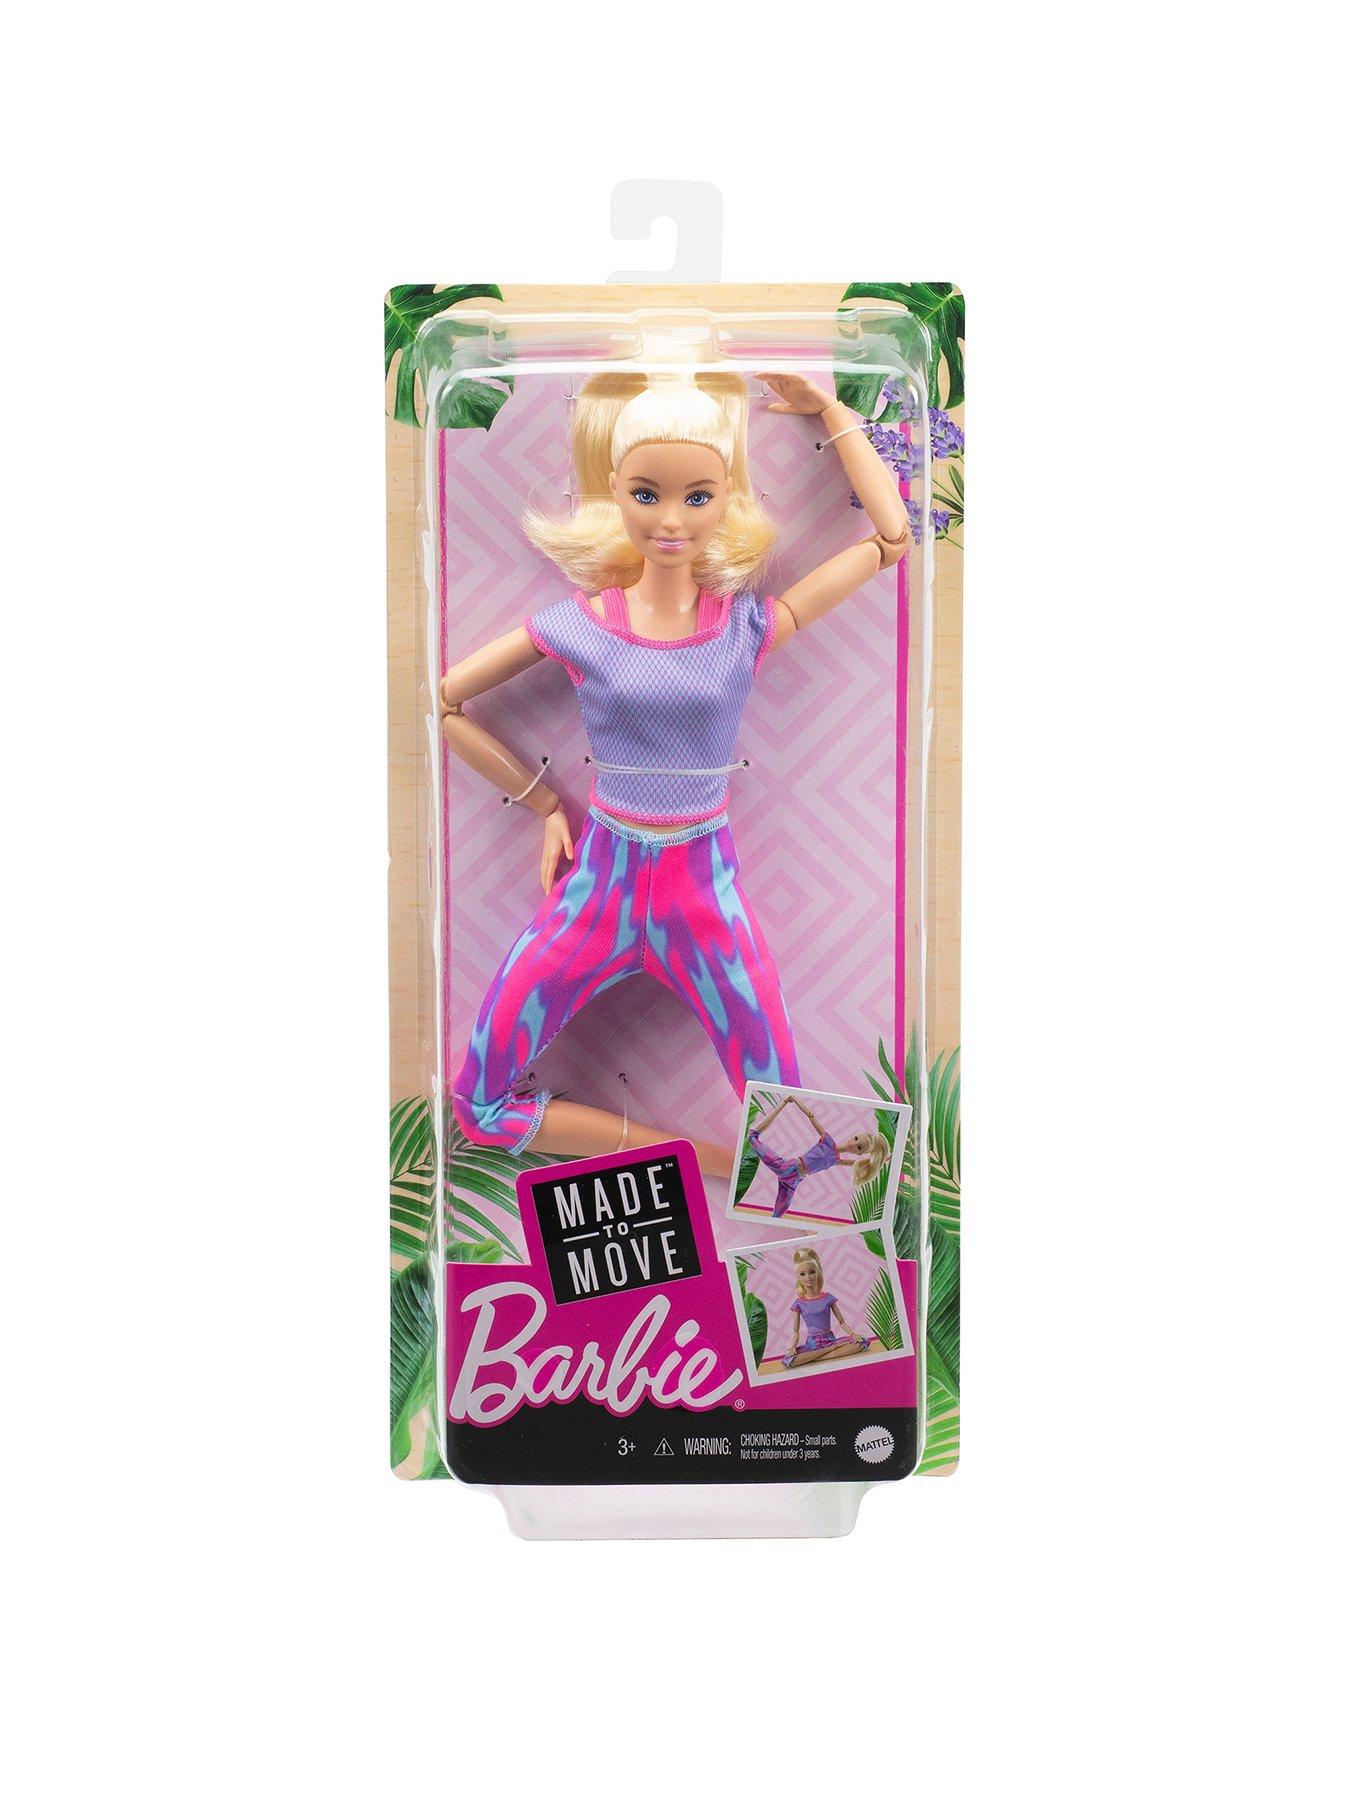 New Made To Move dolls!  Dolls, New dolls, Barbie